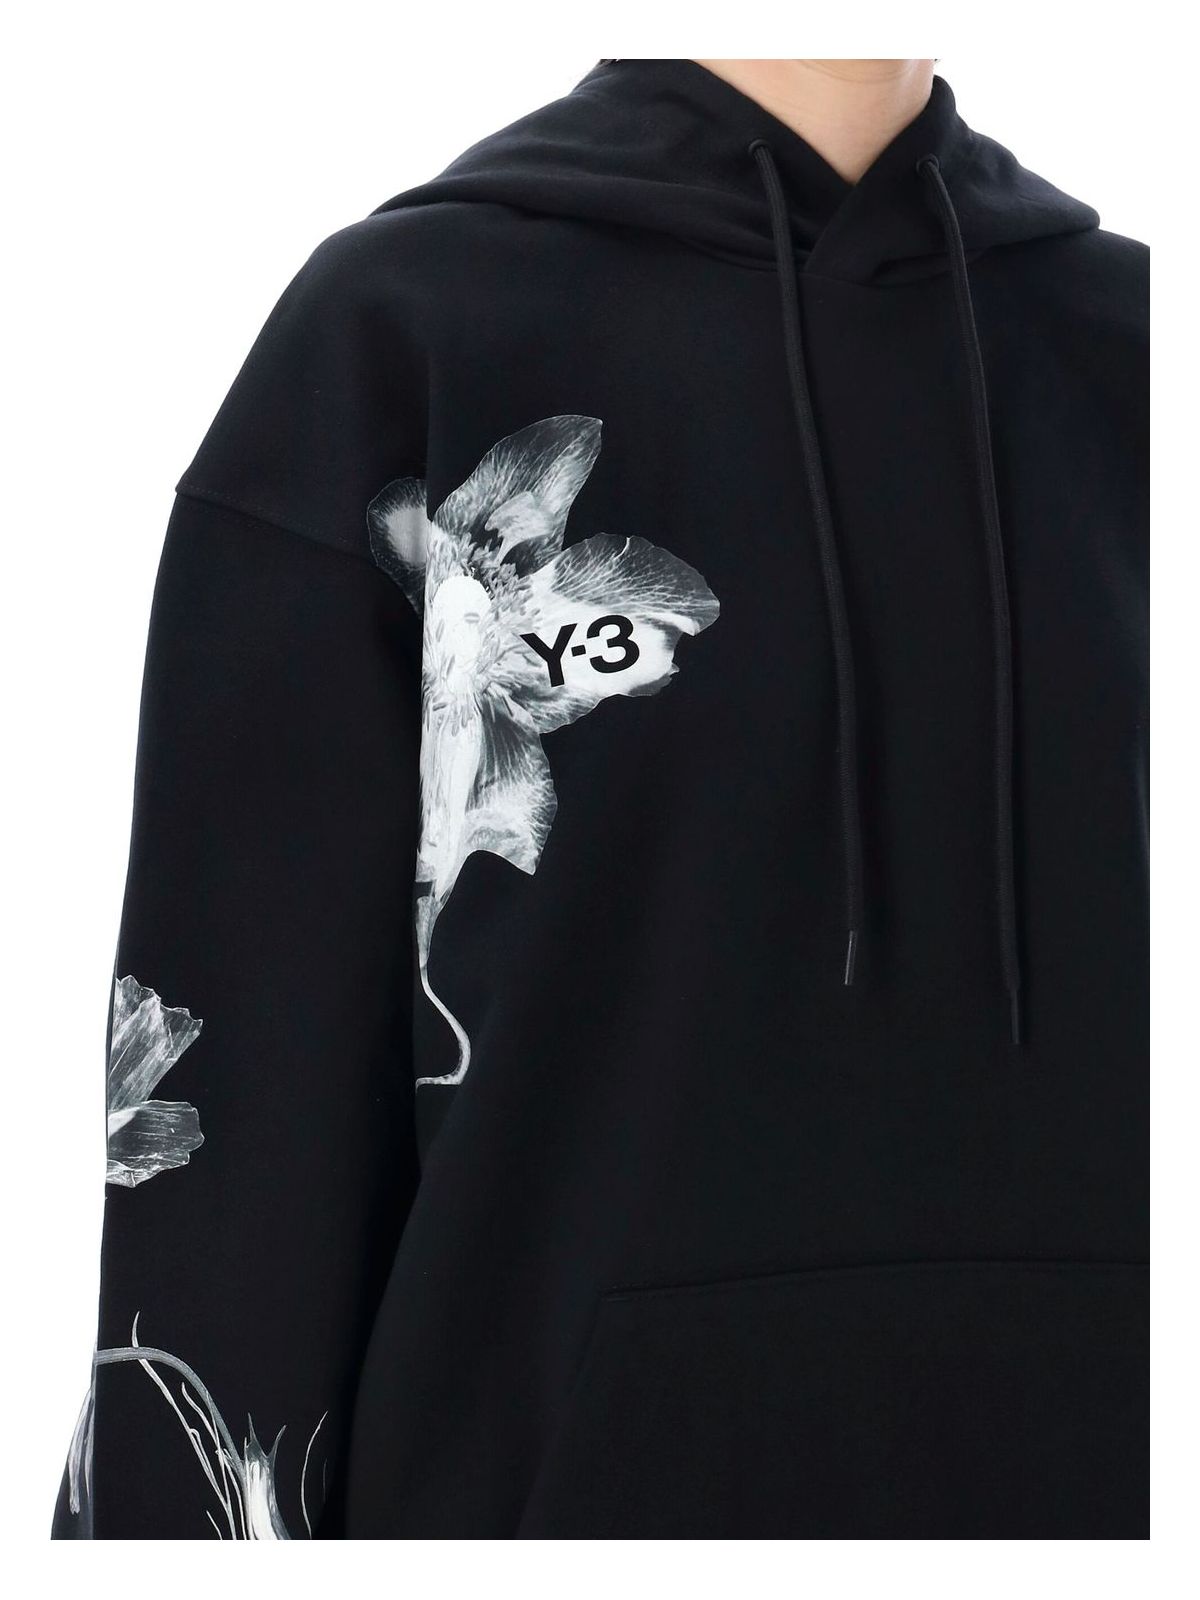 B Y-3 GRAPHICH FRENCH TERRY HOODIE